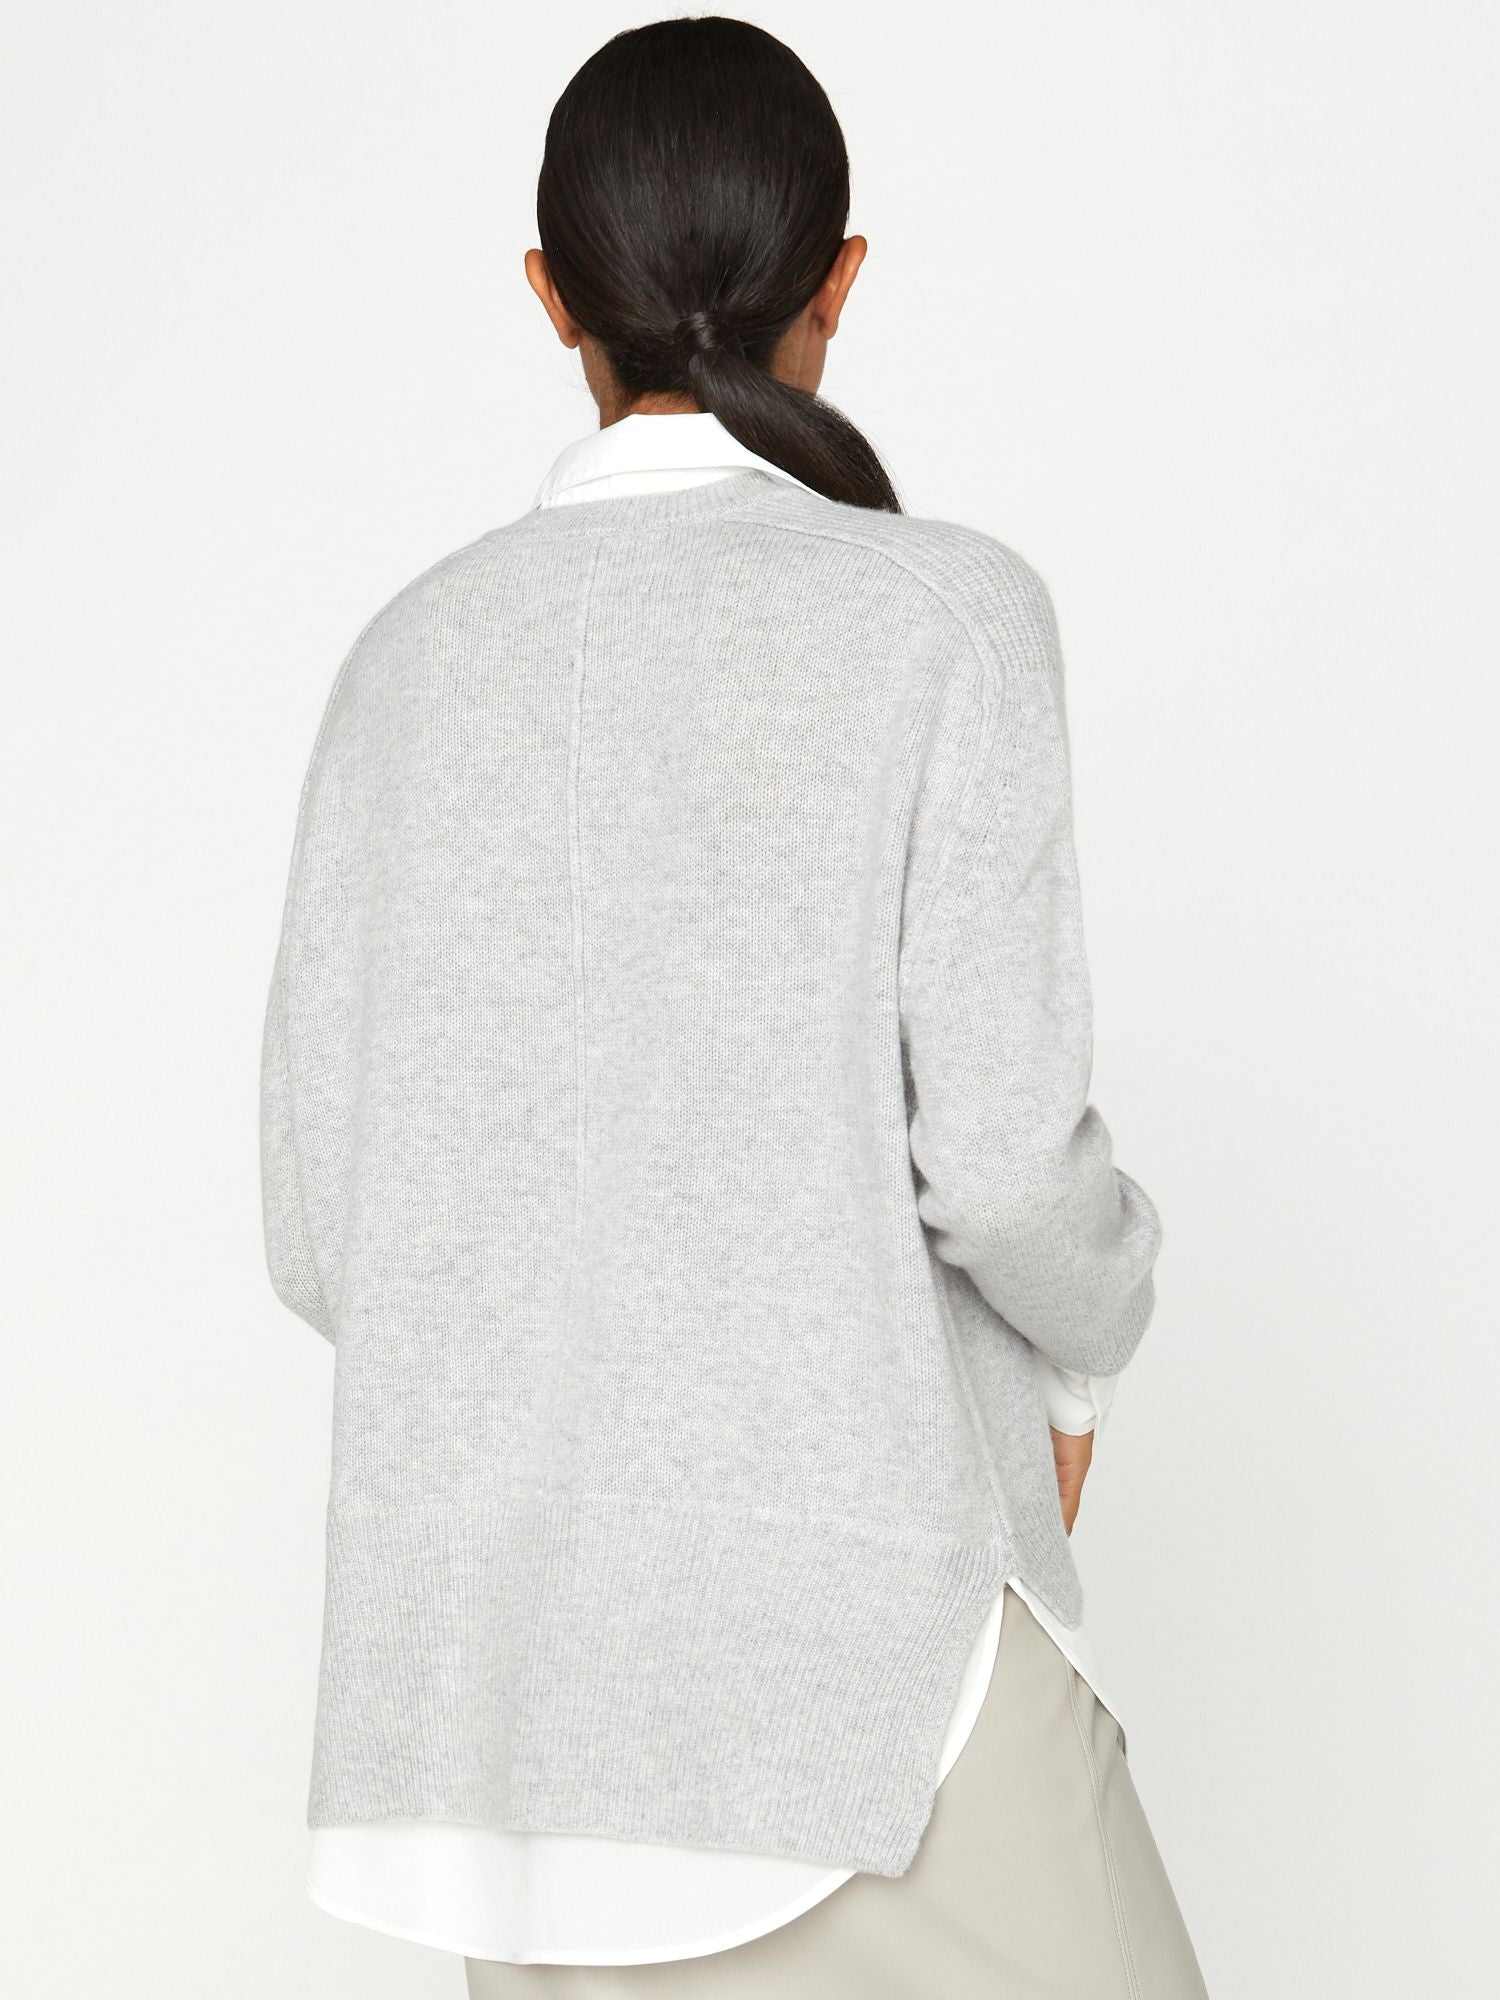 Looker ligth light grey layered v-neck sweater back view